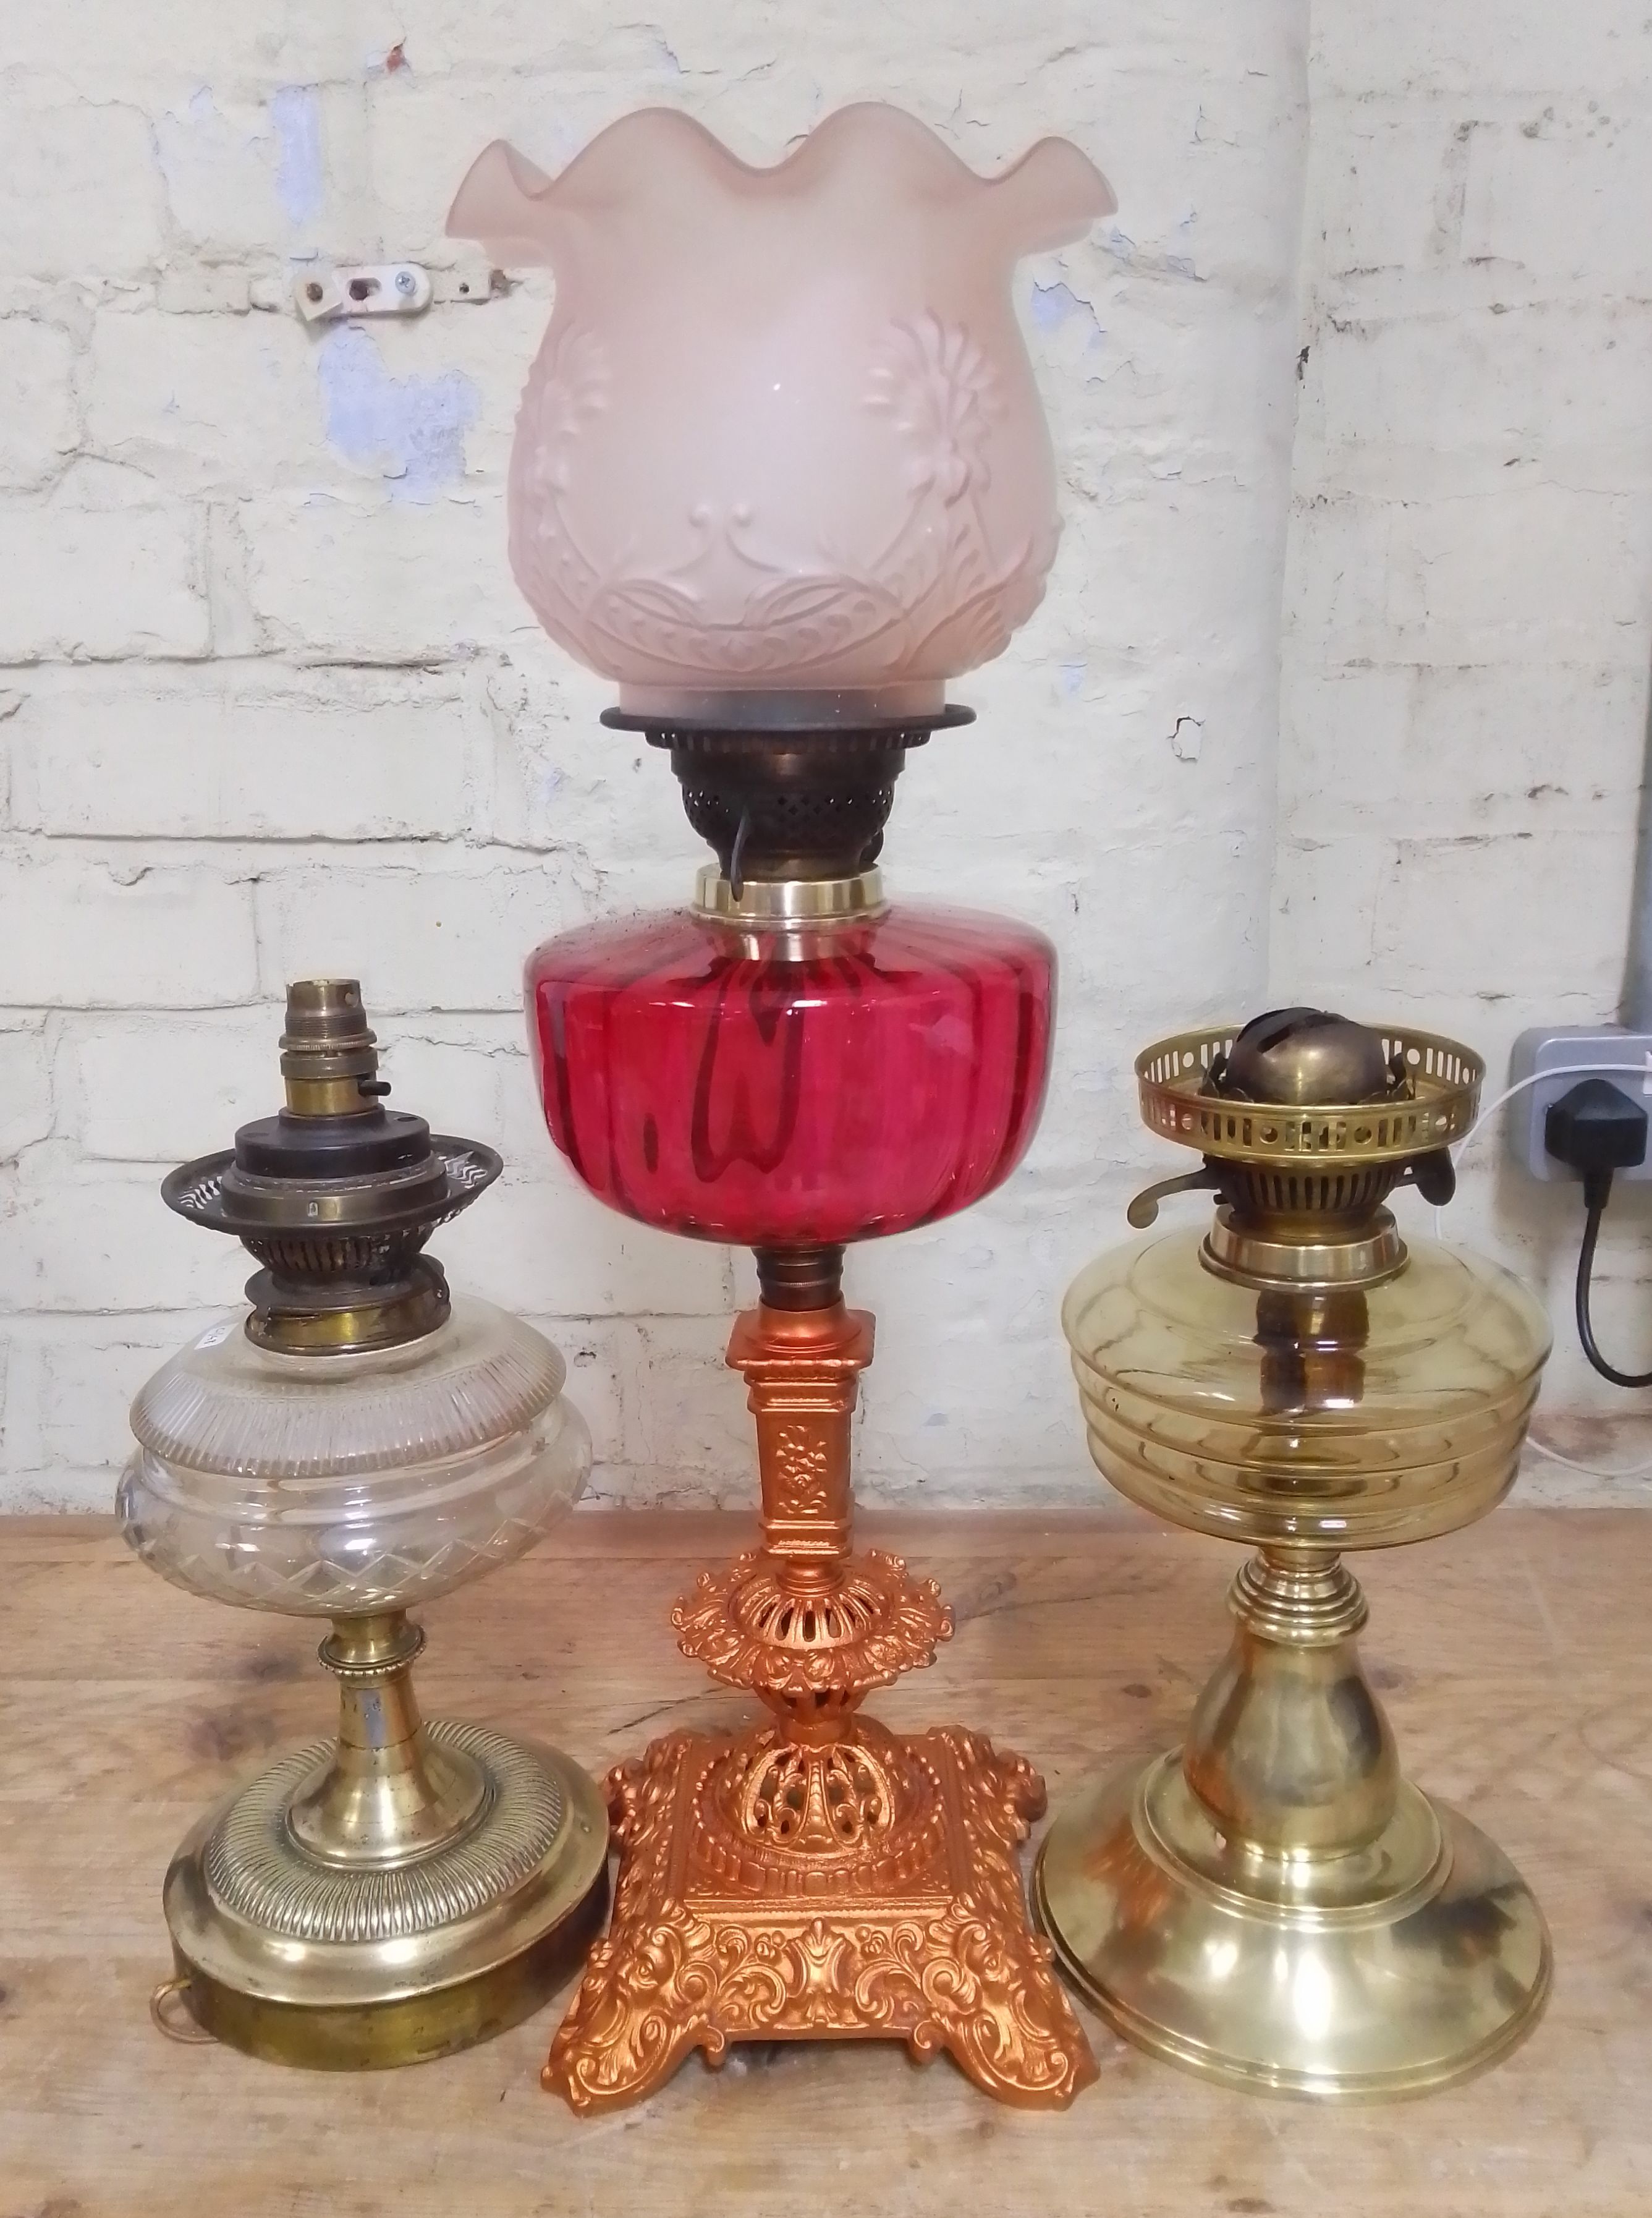 A group of three oil lamps.(one has been converted to electric)